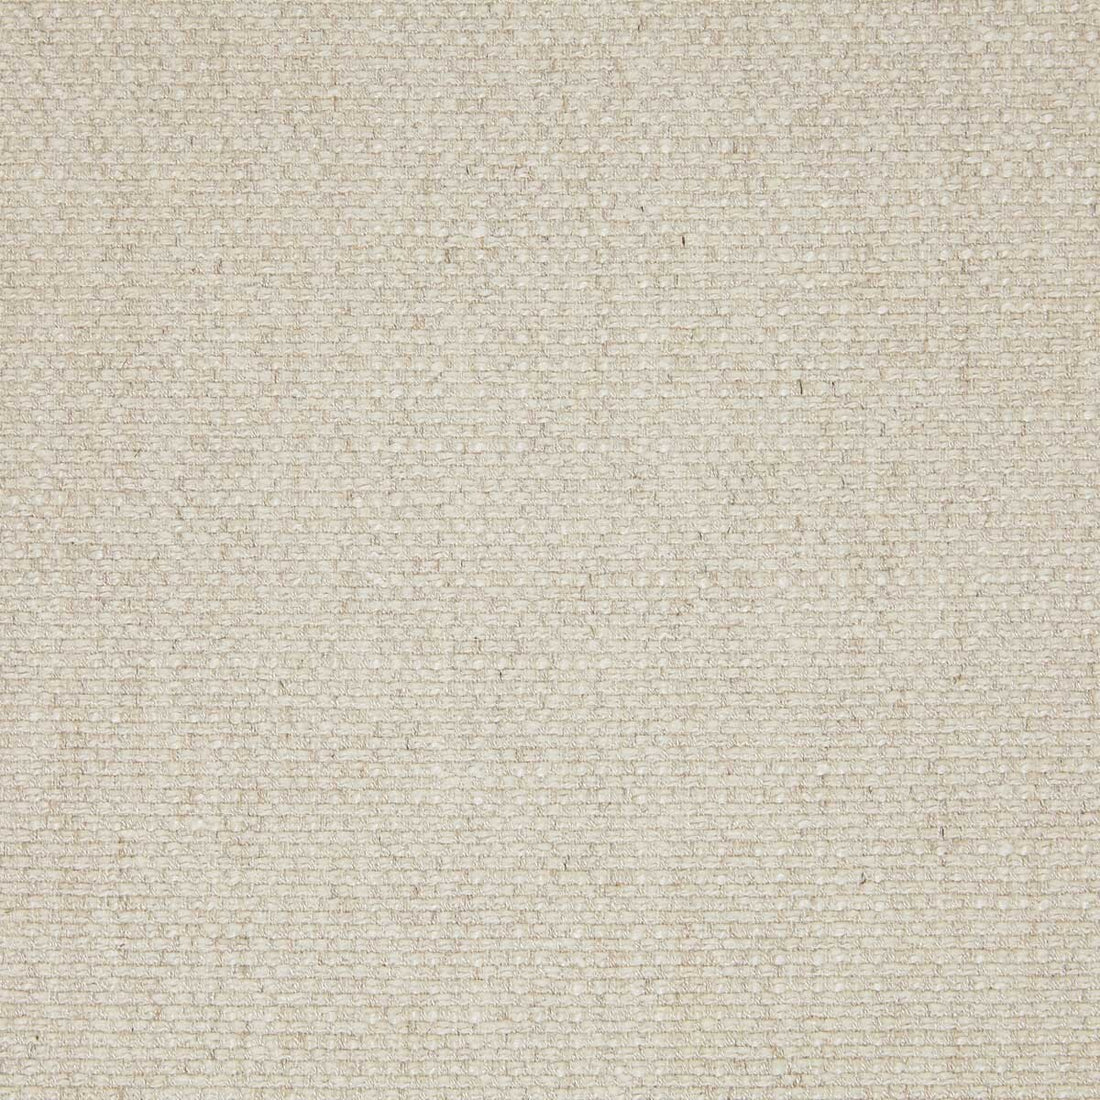 Godai fabric in 17 color - pattern LZ-30349.17.0 - by Kravet Design in the Lizzo collection